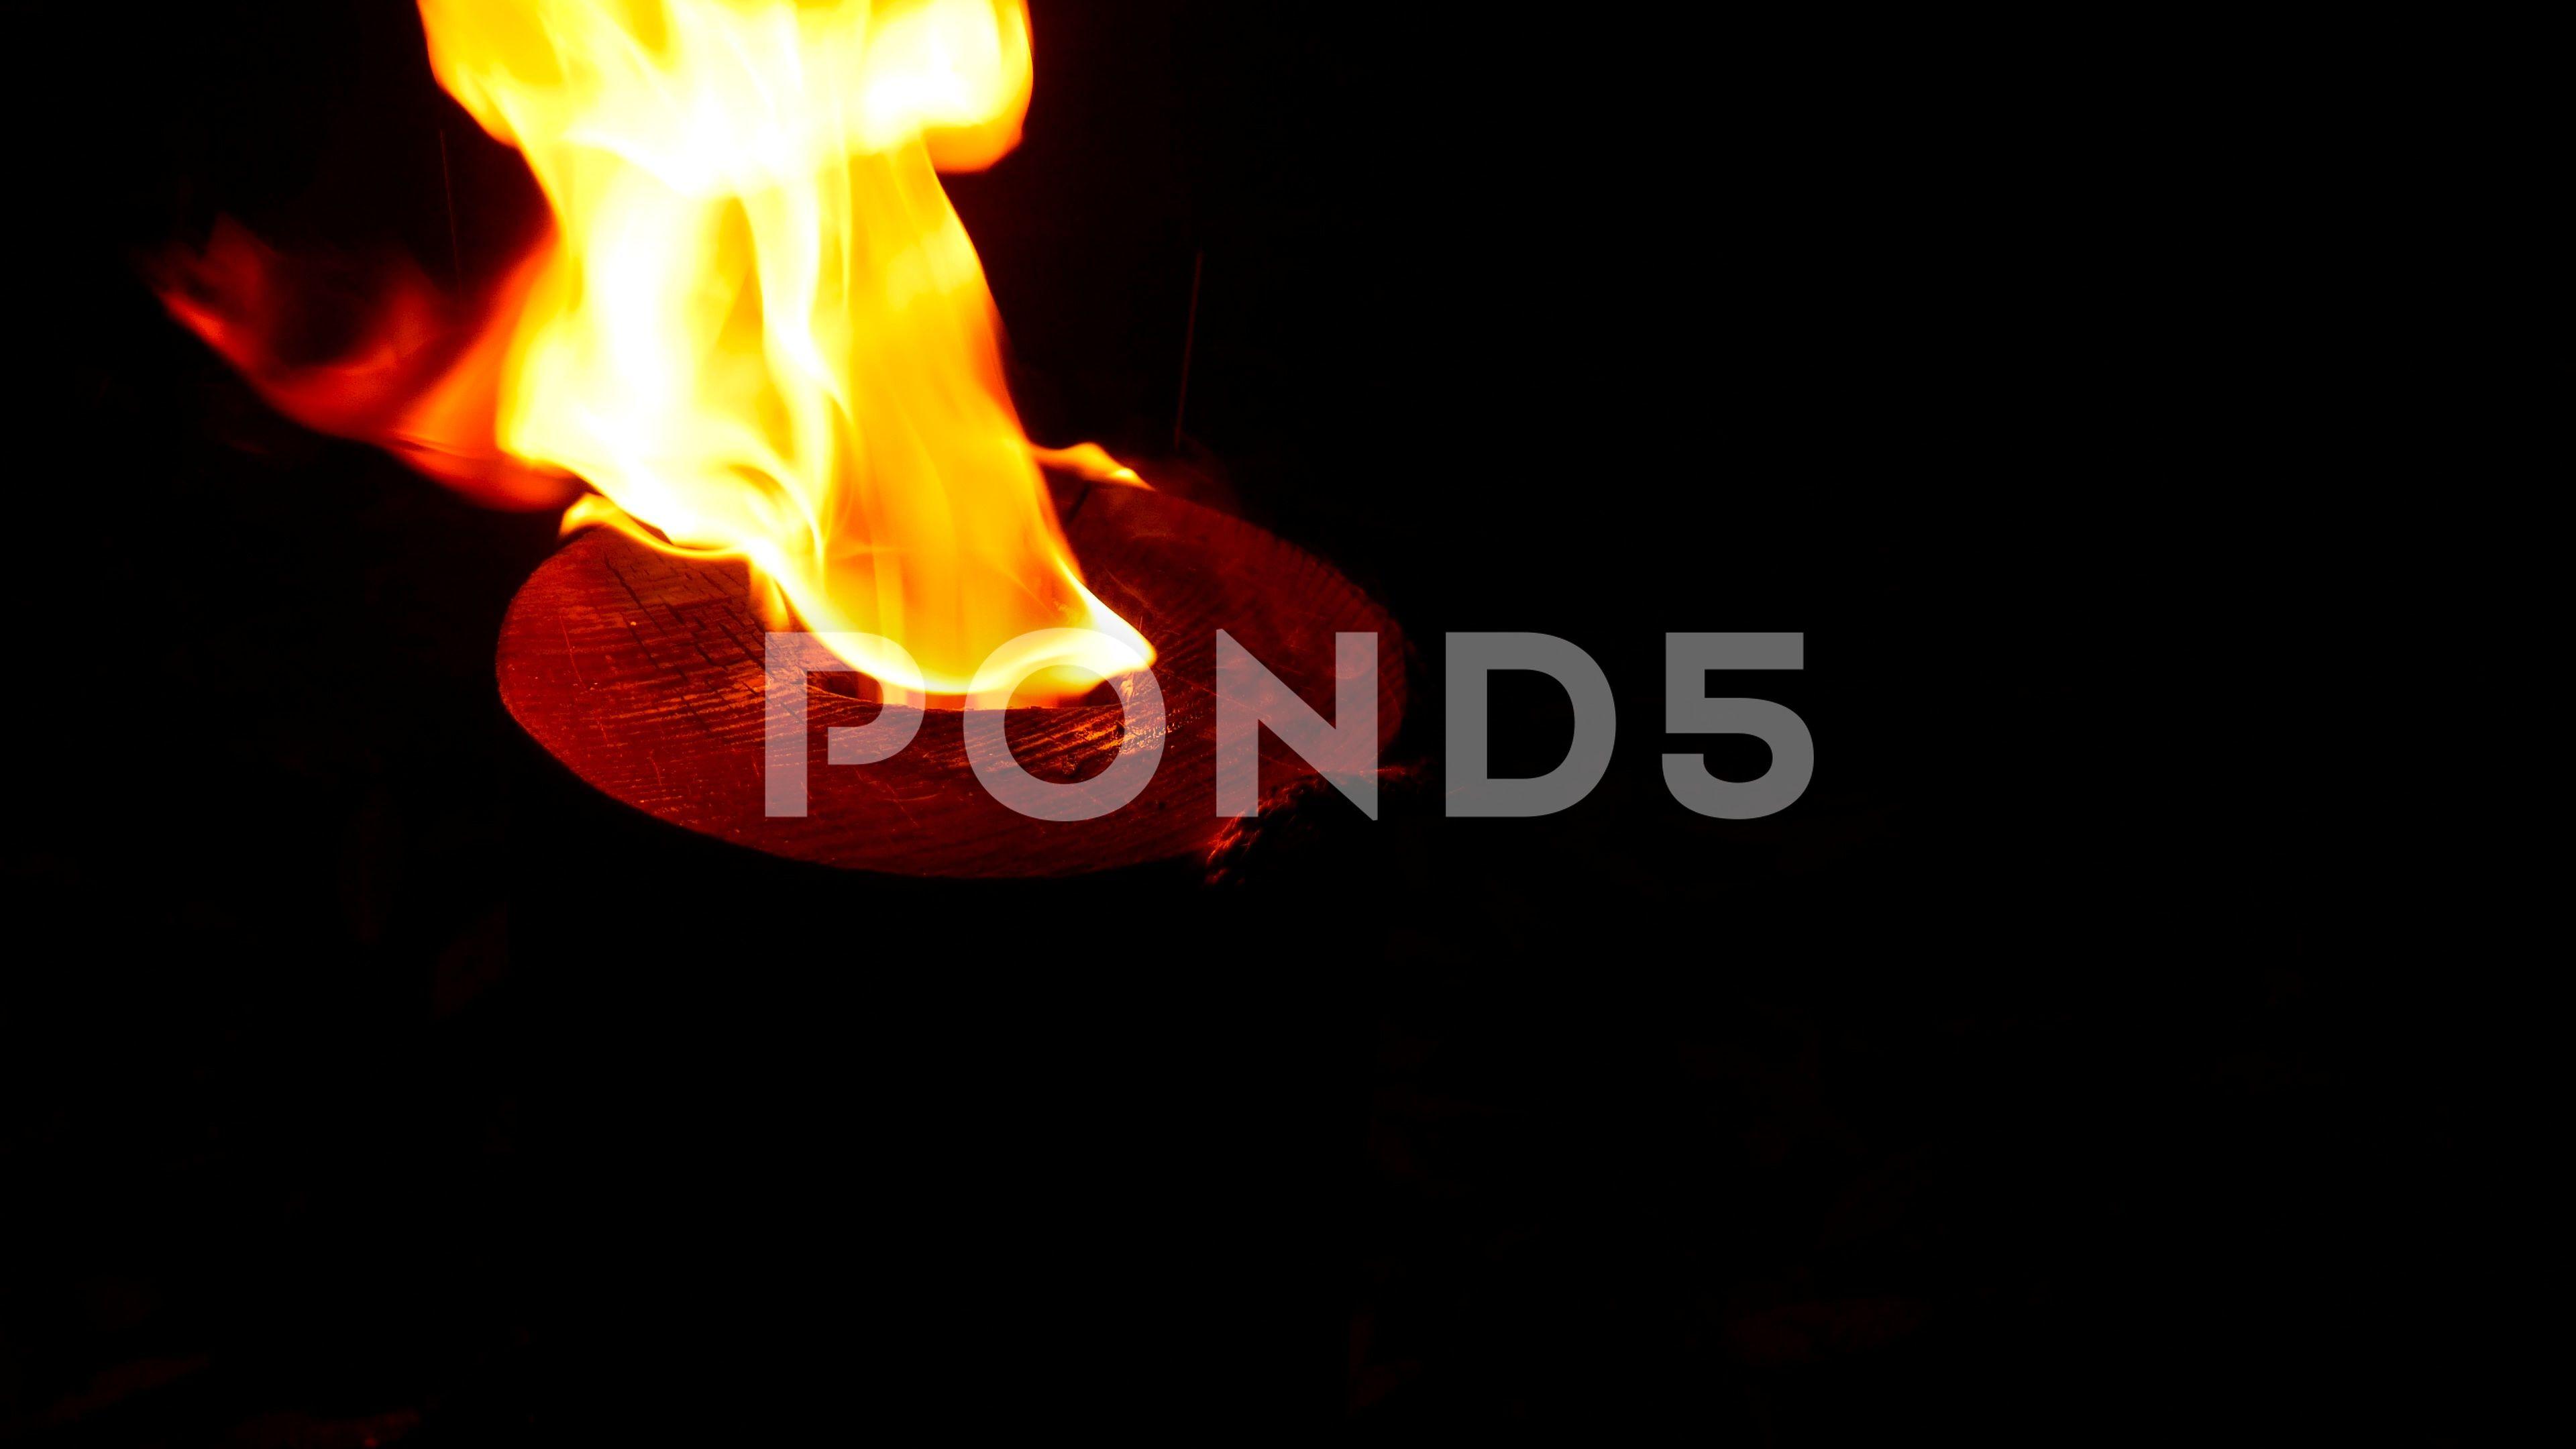 Video: Flames of fire with black background